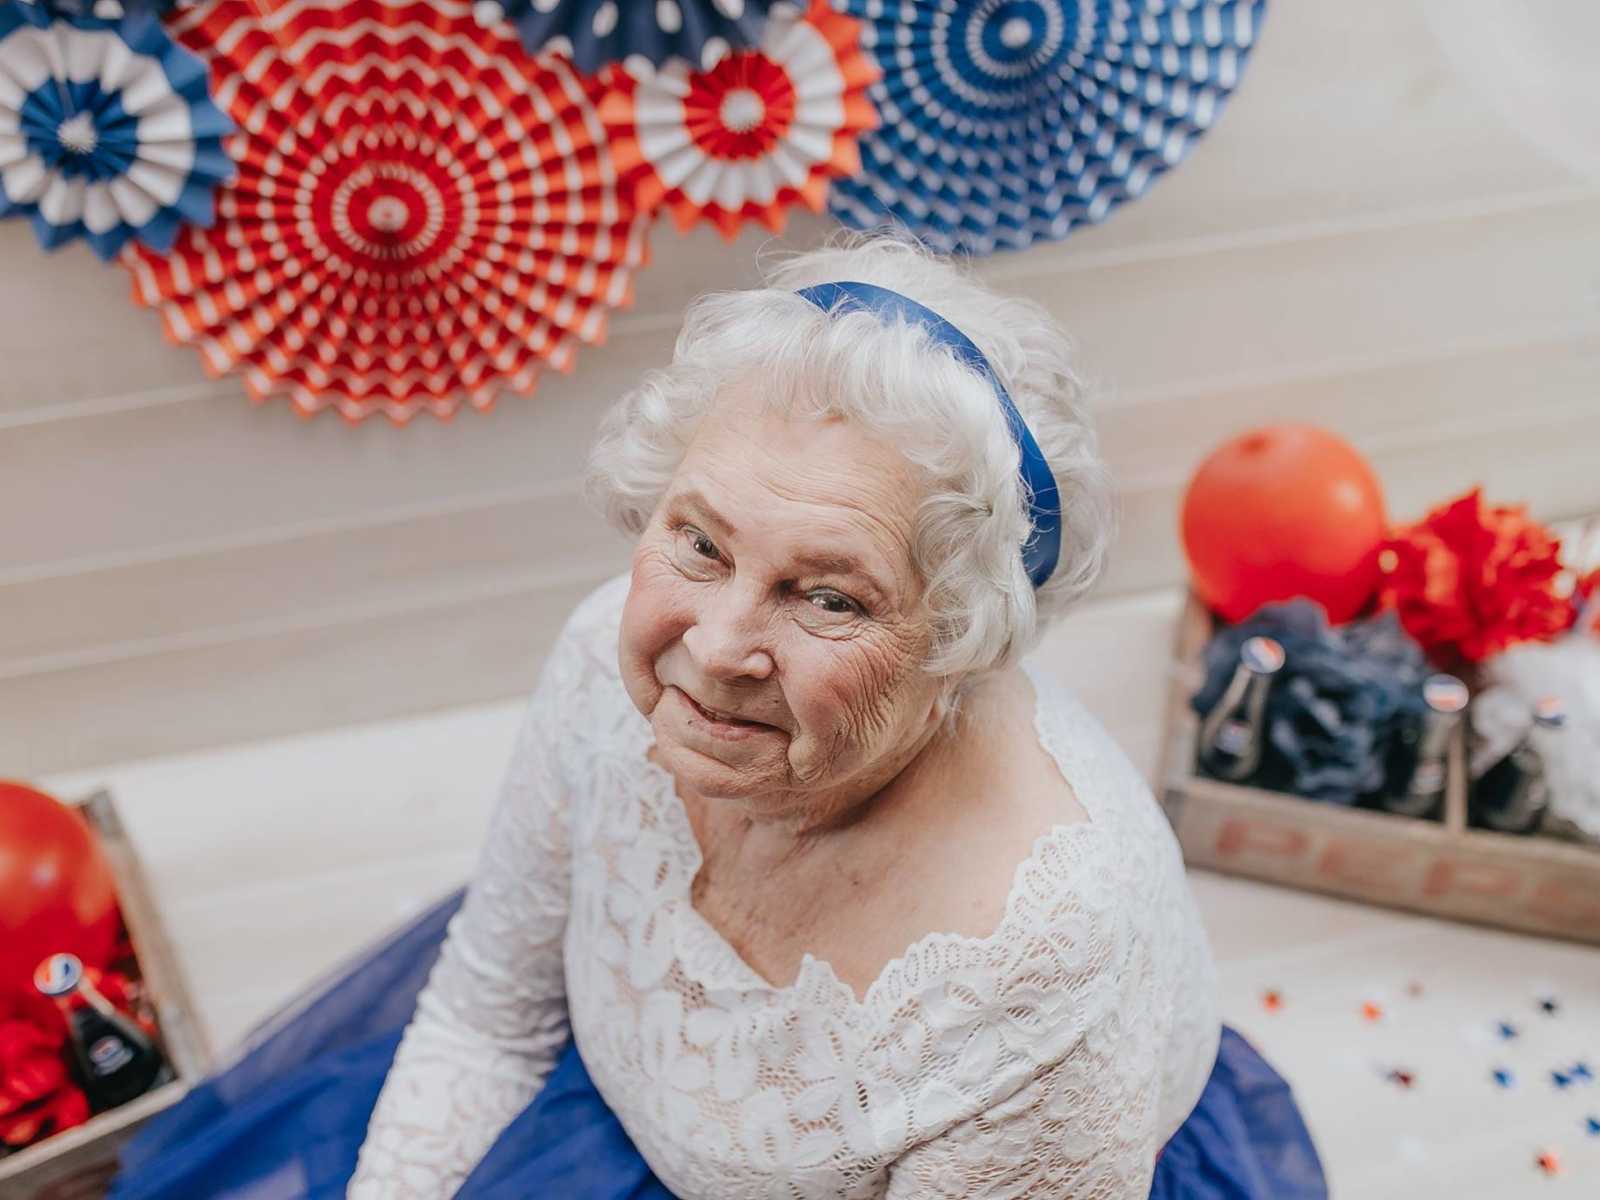 elderly woman looks up smiling with red white and blue decorations all around her